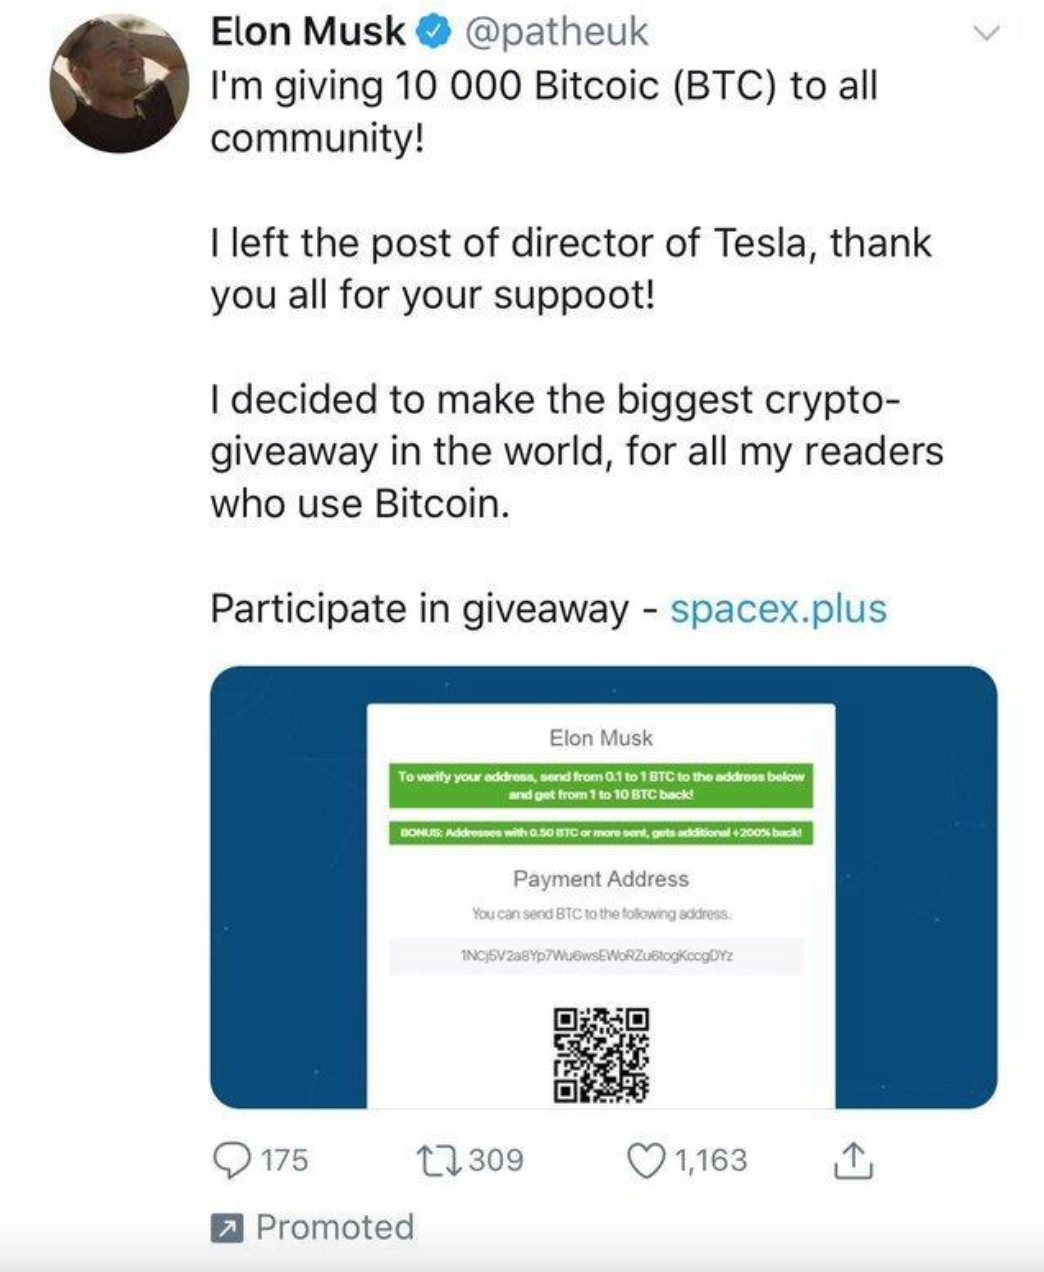 An example of a fake Bitcoin giveaway scam.